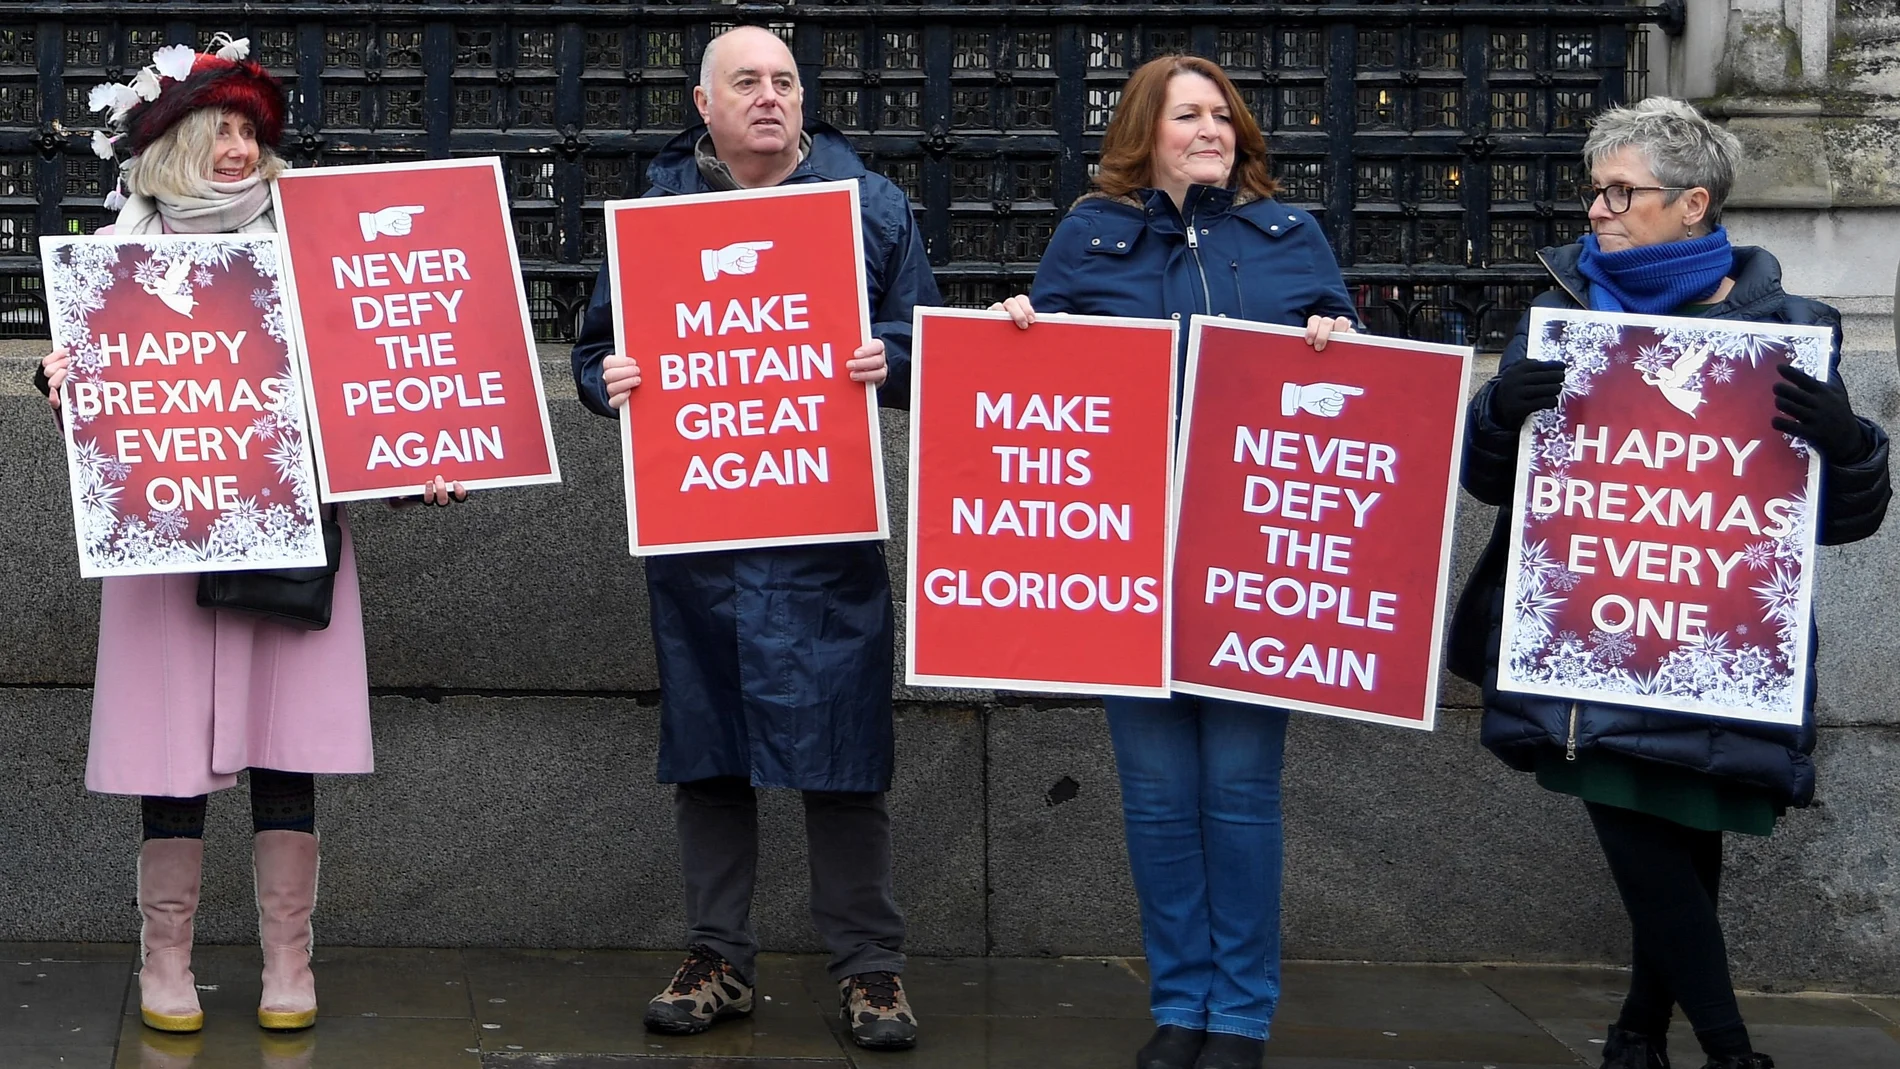 Pro-Brexit demonstrators hold signs outside the Houses of Parliament in London